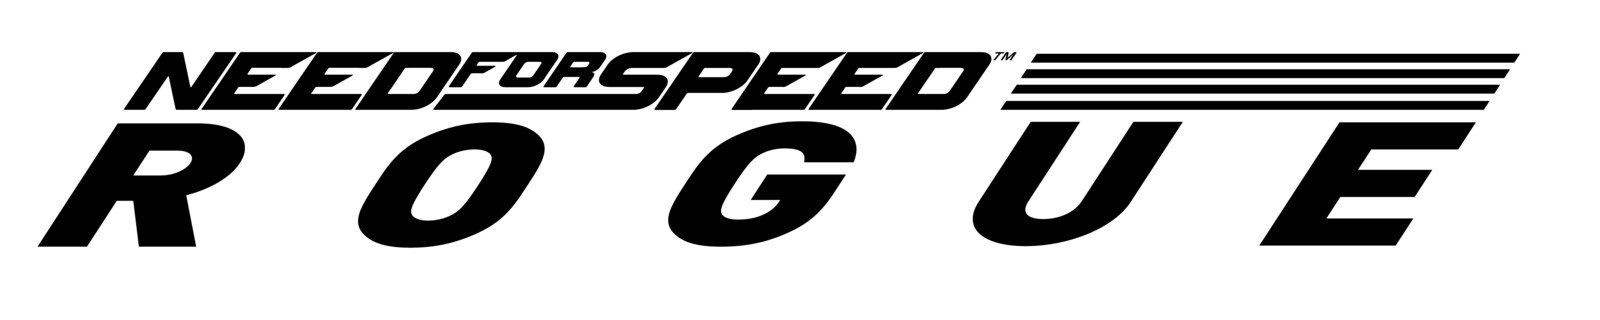 Need for Speed Rogue (simplified logo)